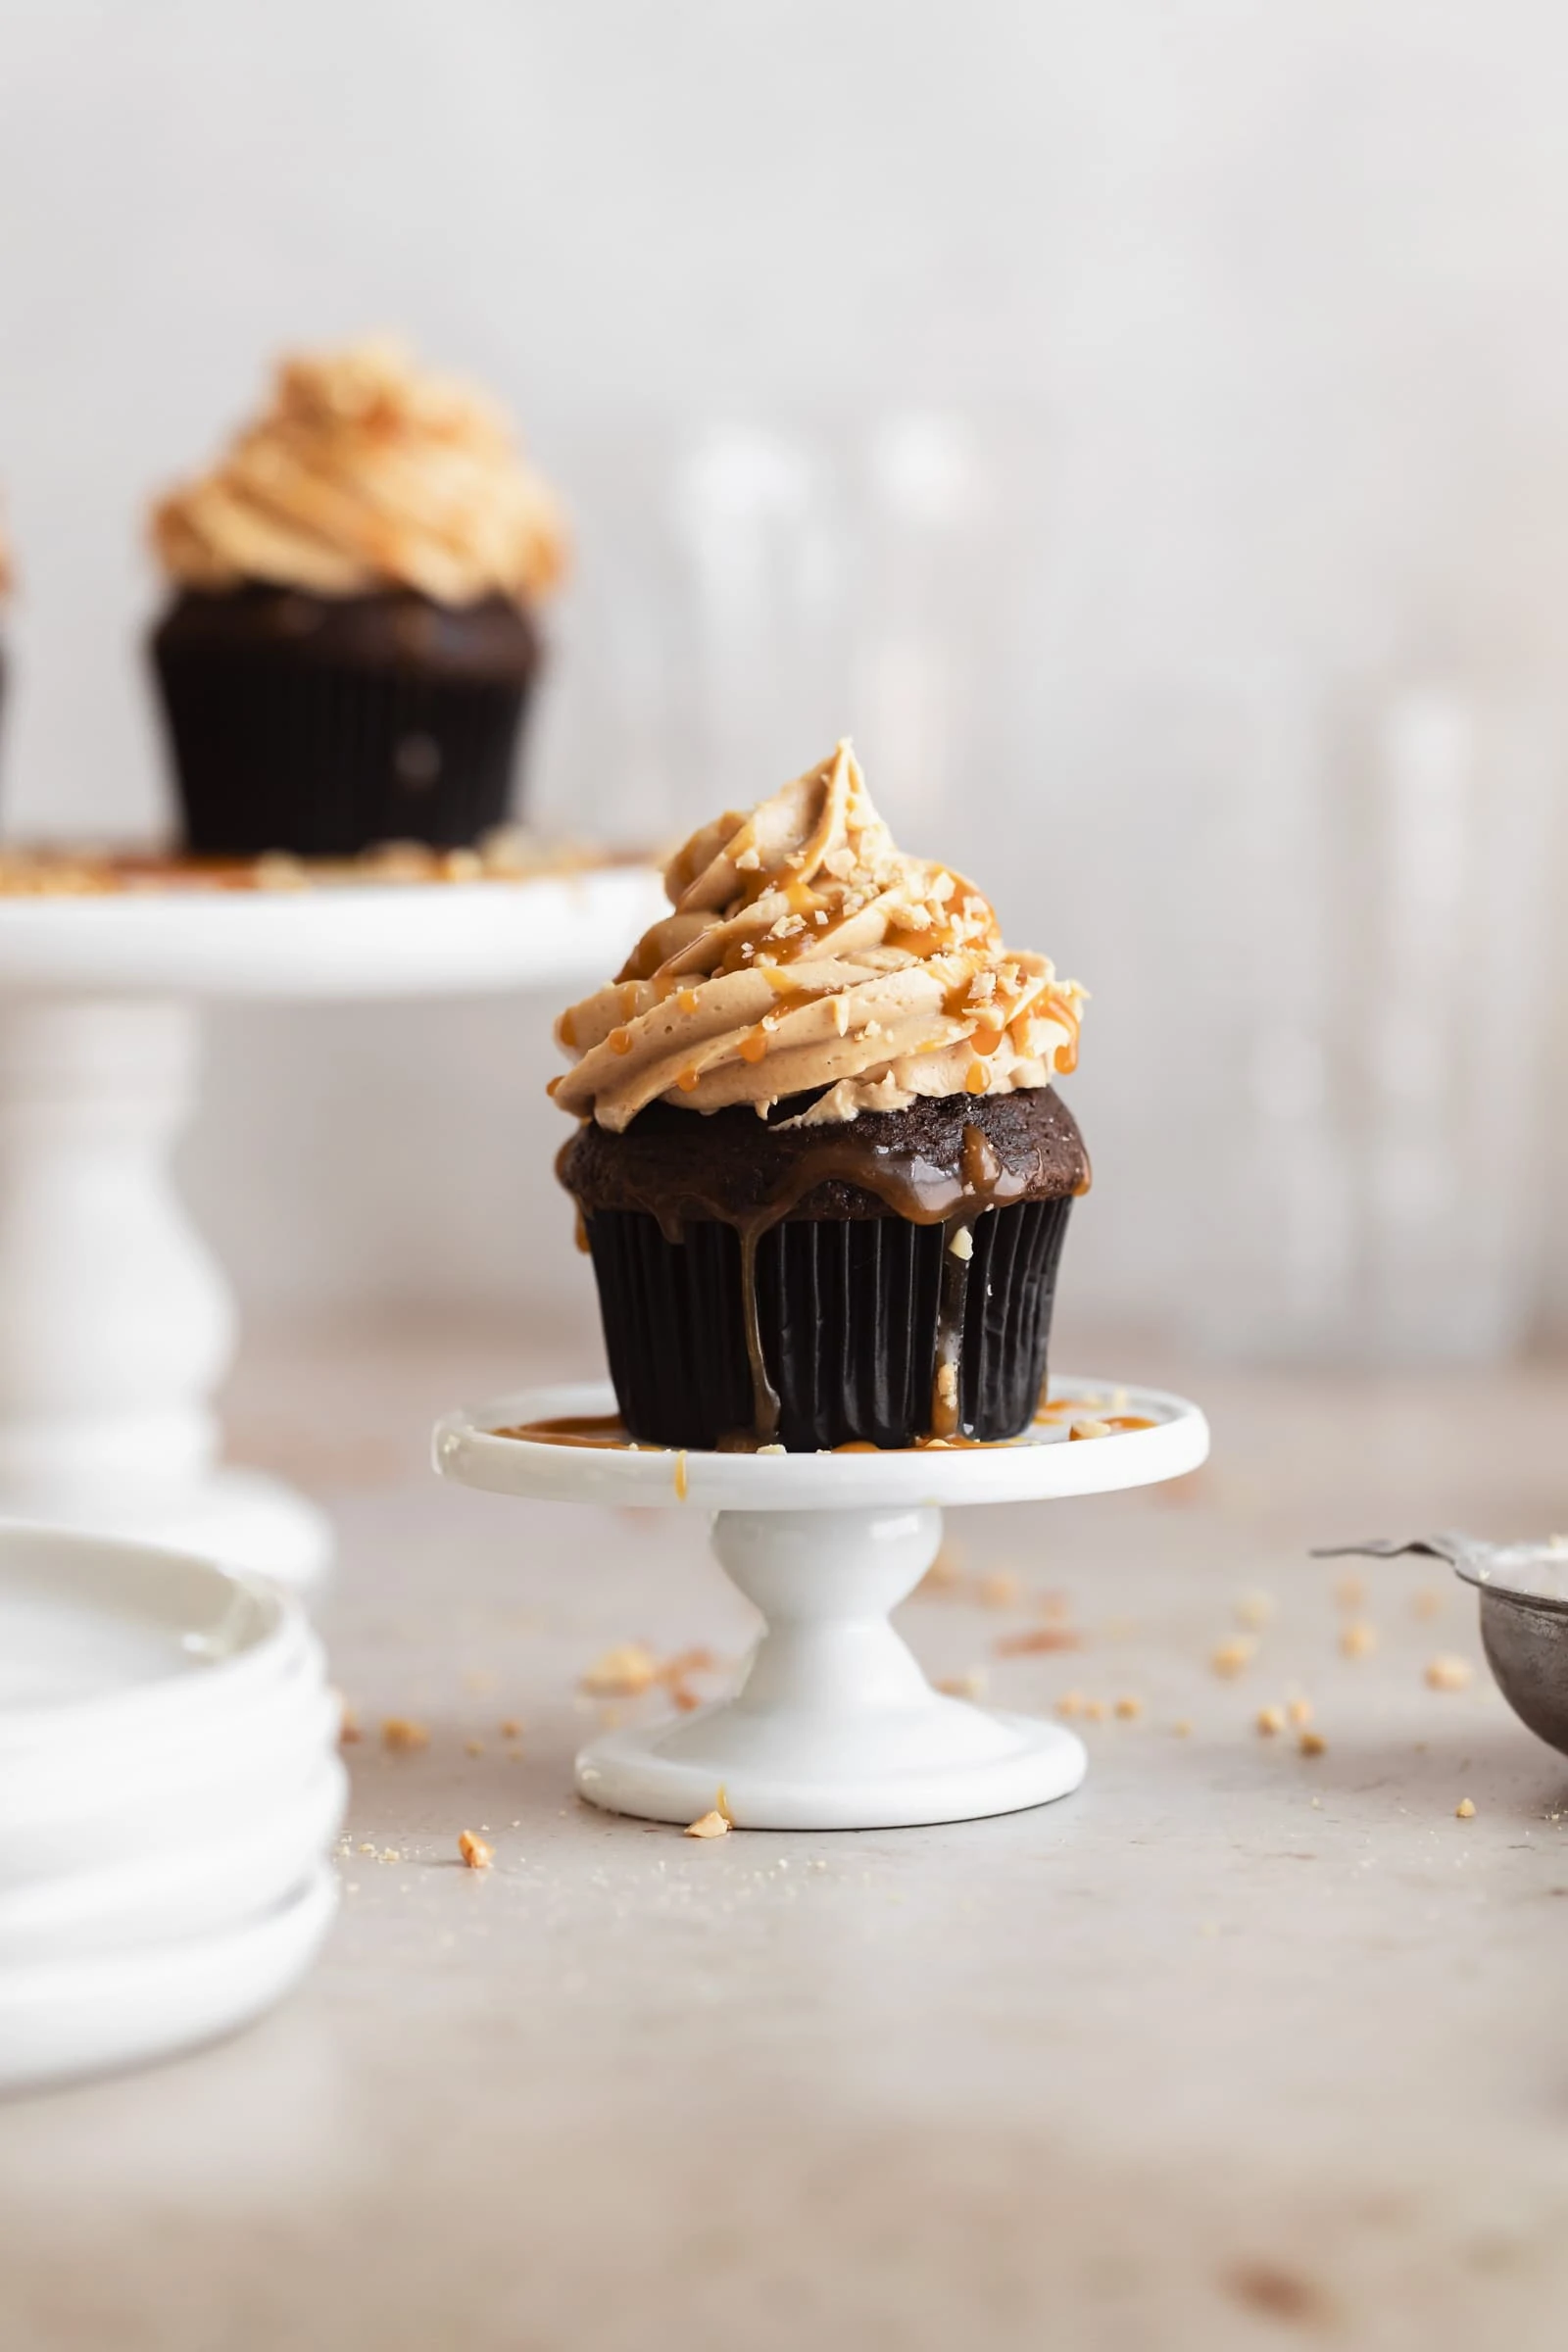 chocolate peanut butter cupcakes with salted caramel drizzle